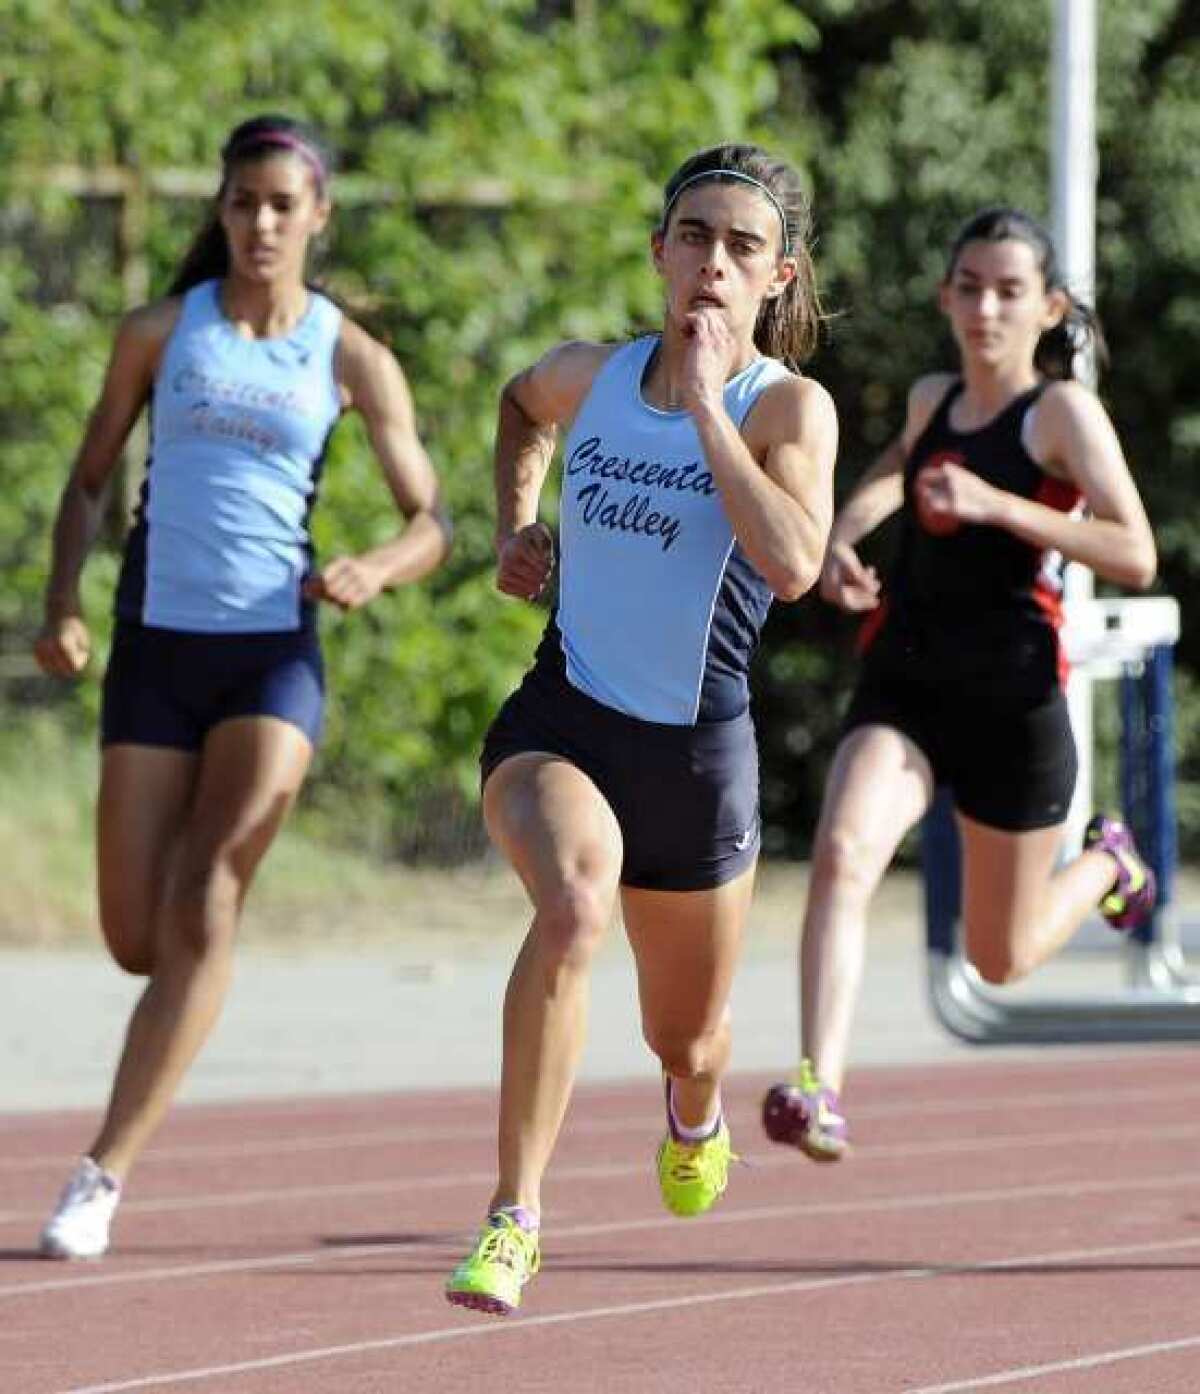 Crescenta Valley's Kayleigh Carrillo, center, leads before eventually winning the 200-meter race in a dual meet with Glendale High.